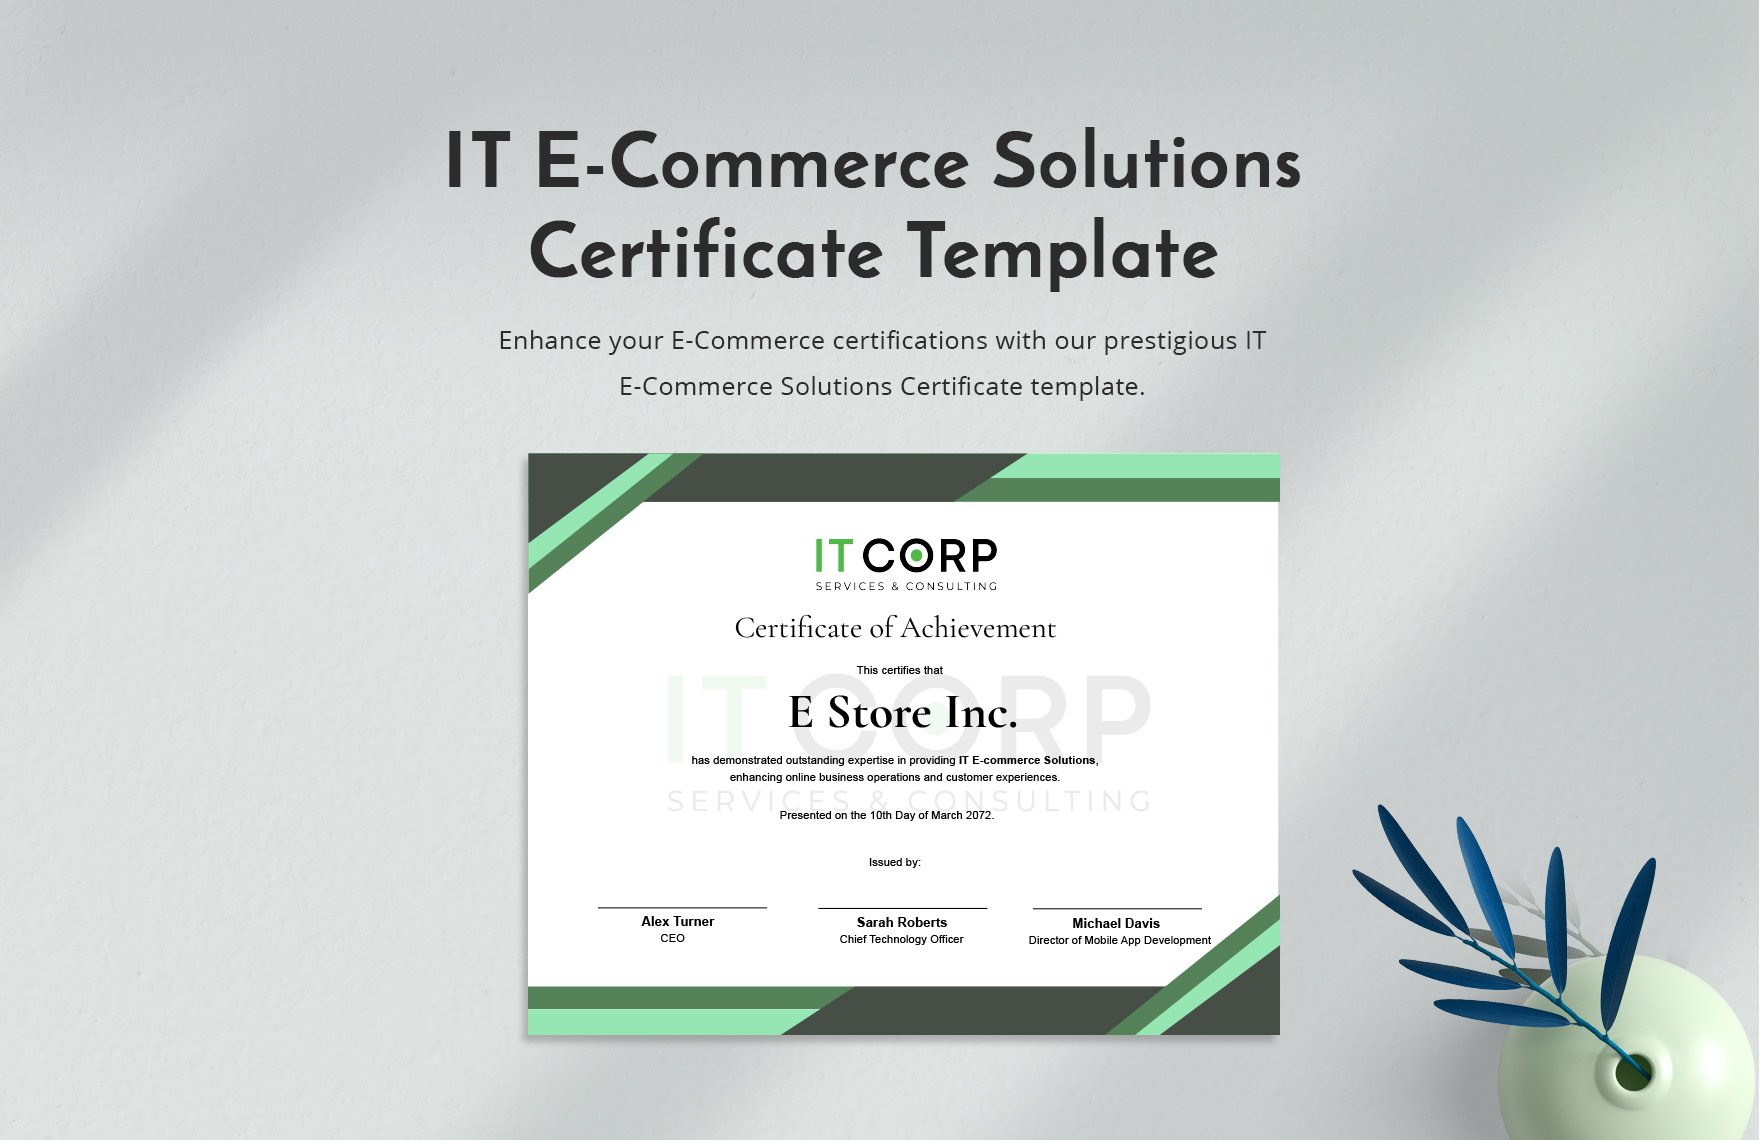 IT E-Commerce Solutions Certificate Template